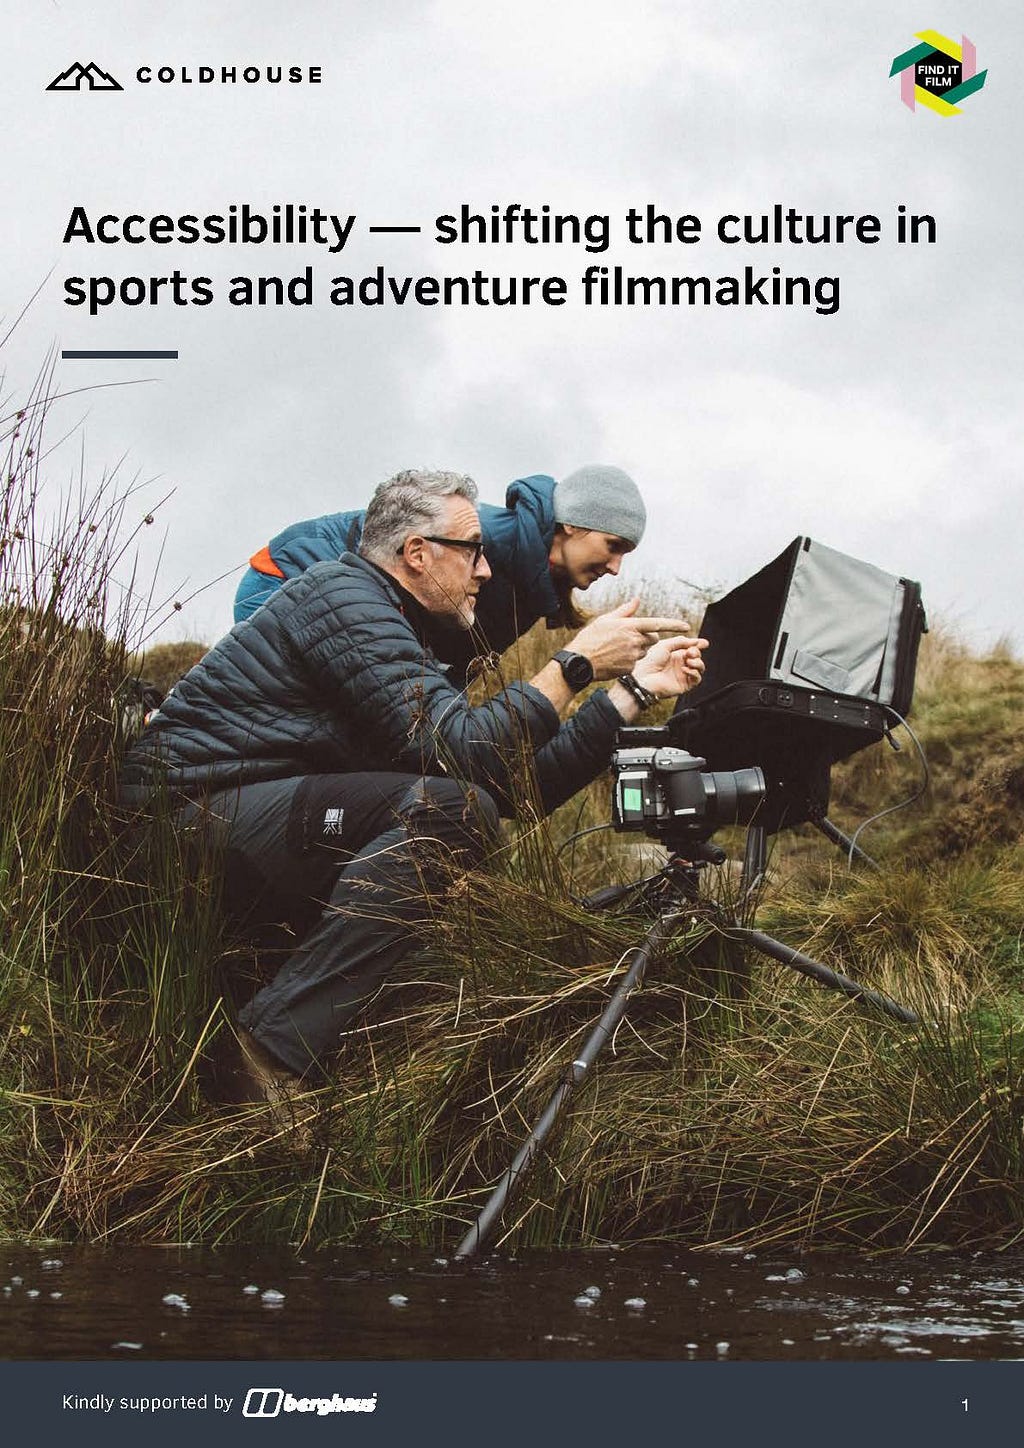 An image of a document front cover that has “Accessibility — shifting the culture in sports and adventure filmmaking” written on it. The image is two filmmakers crouched in some reeds and grass next to a brown river. It is overcast. One is a white male, wearing black, mid forties with short grey hair. The other is a white female, wearing a blue jacket and trousers and a grey hat. He is looking at a subject that is being filmed and she is looking at a directors monitor.